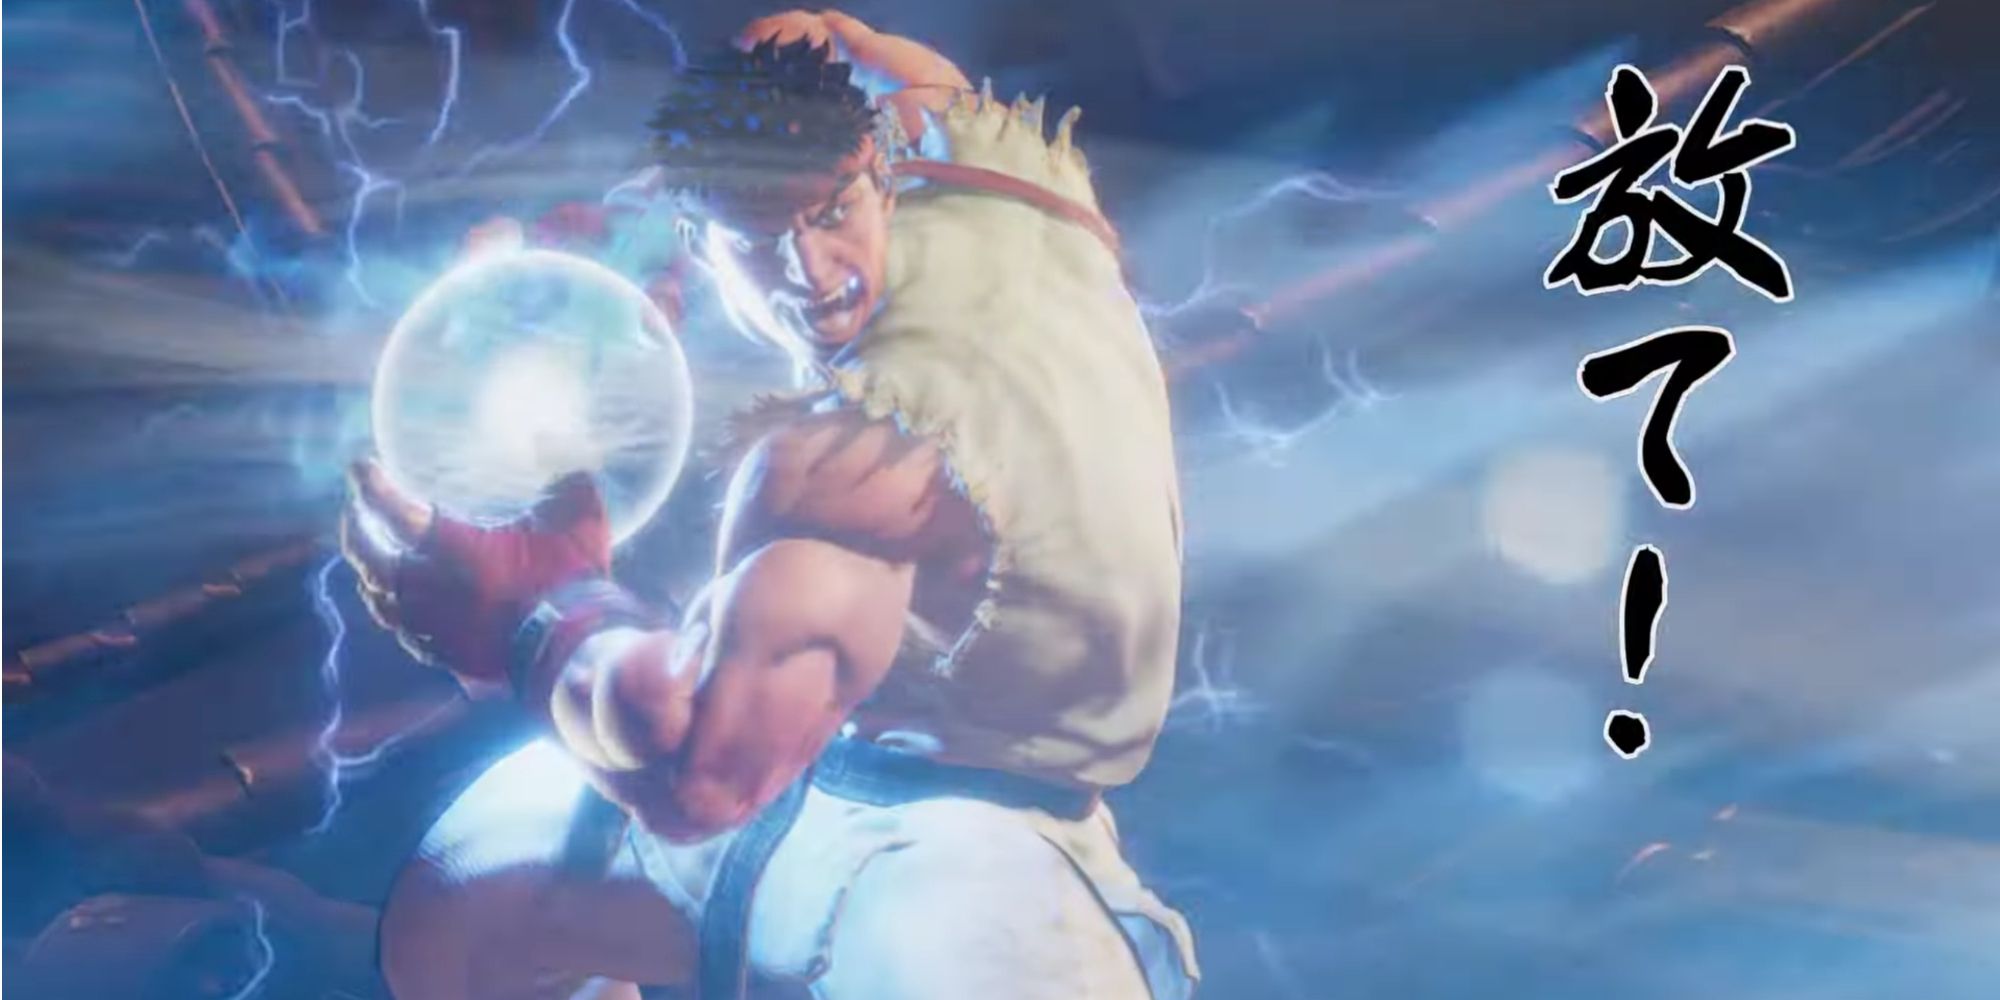 ryu charging a hadouken in street fighter vr